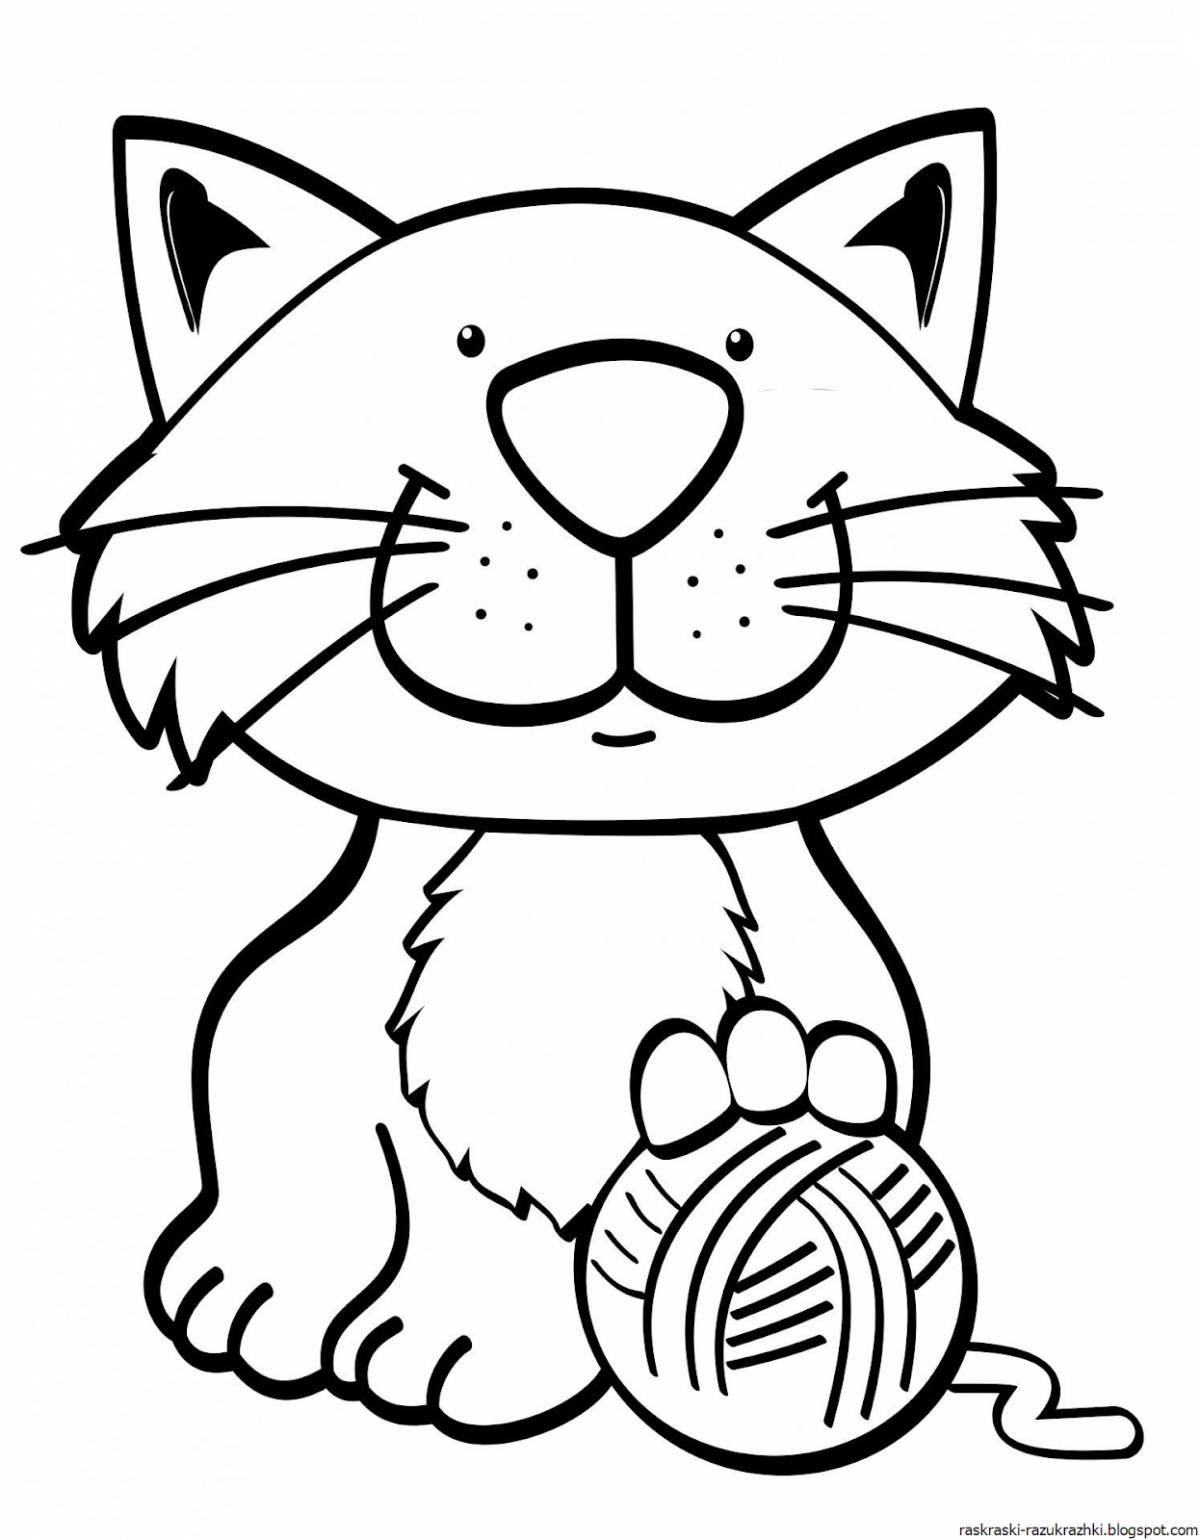 Naughty cats coloring pages for kids